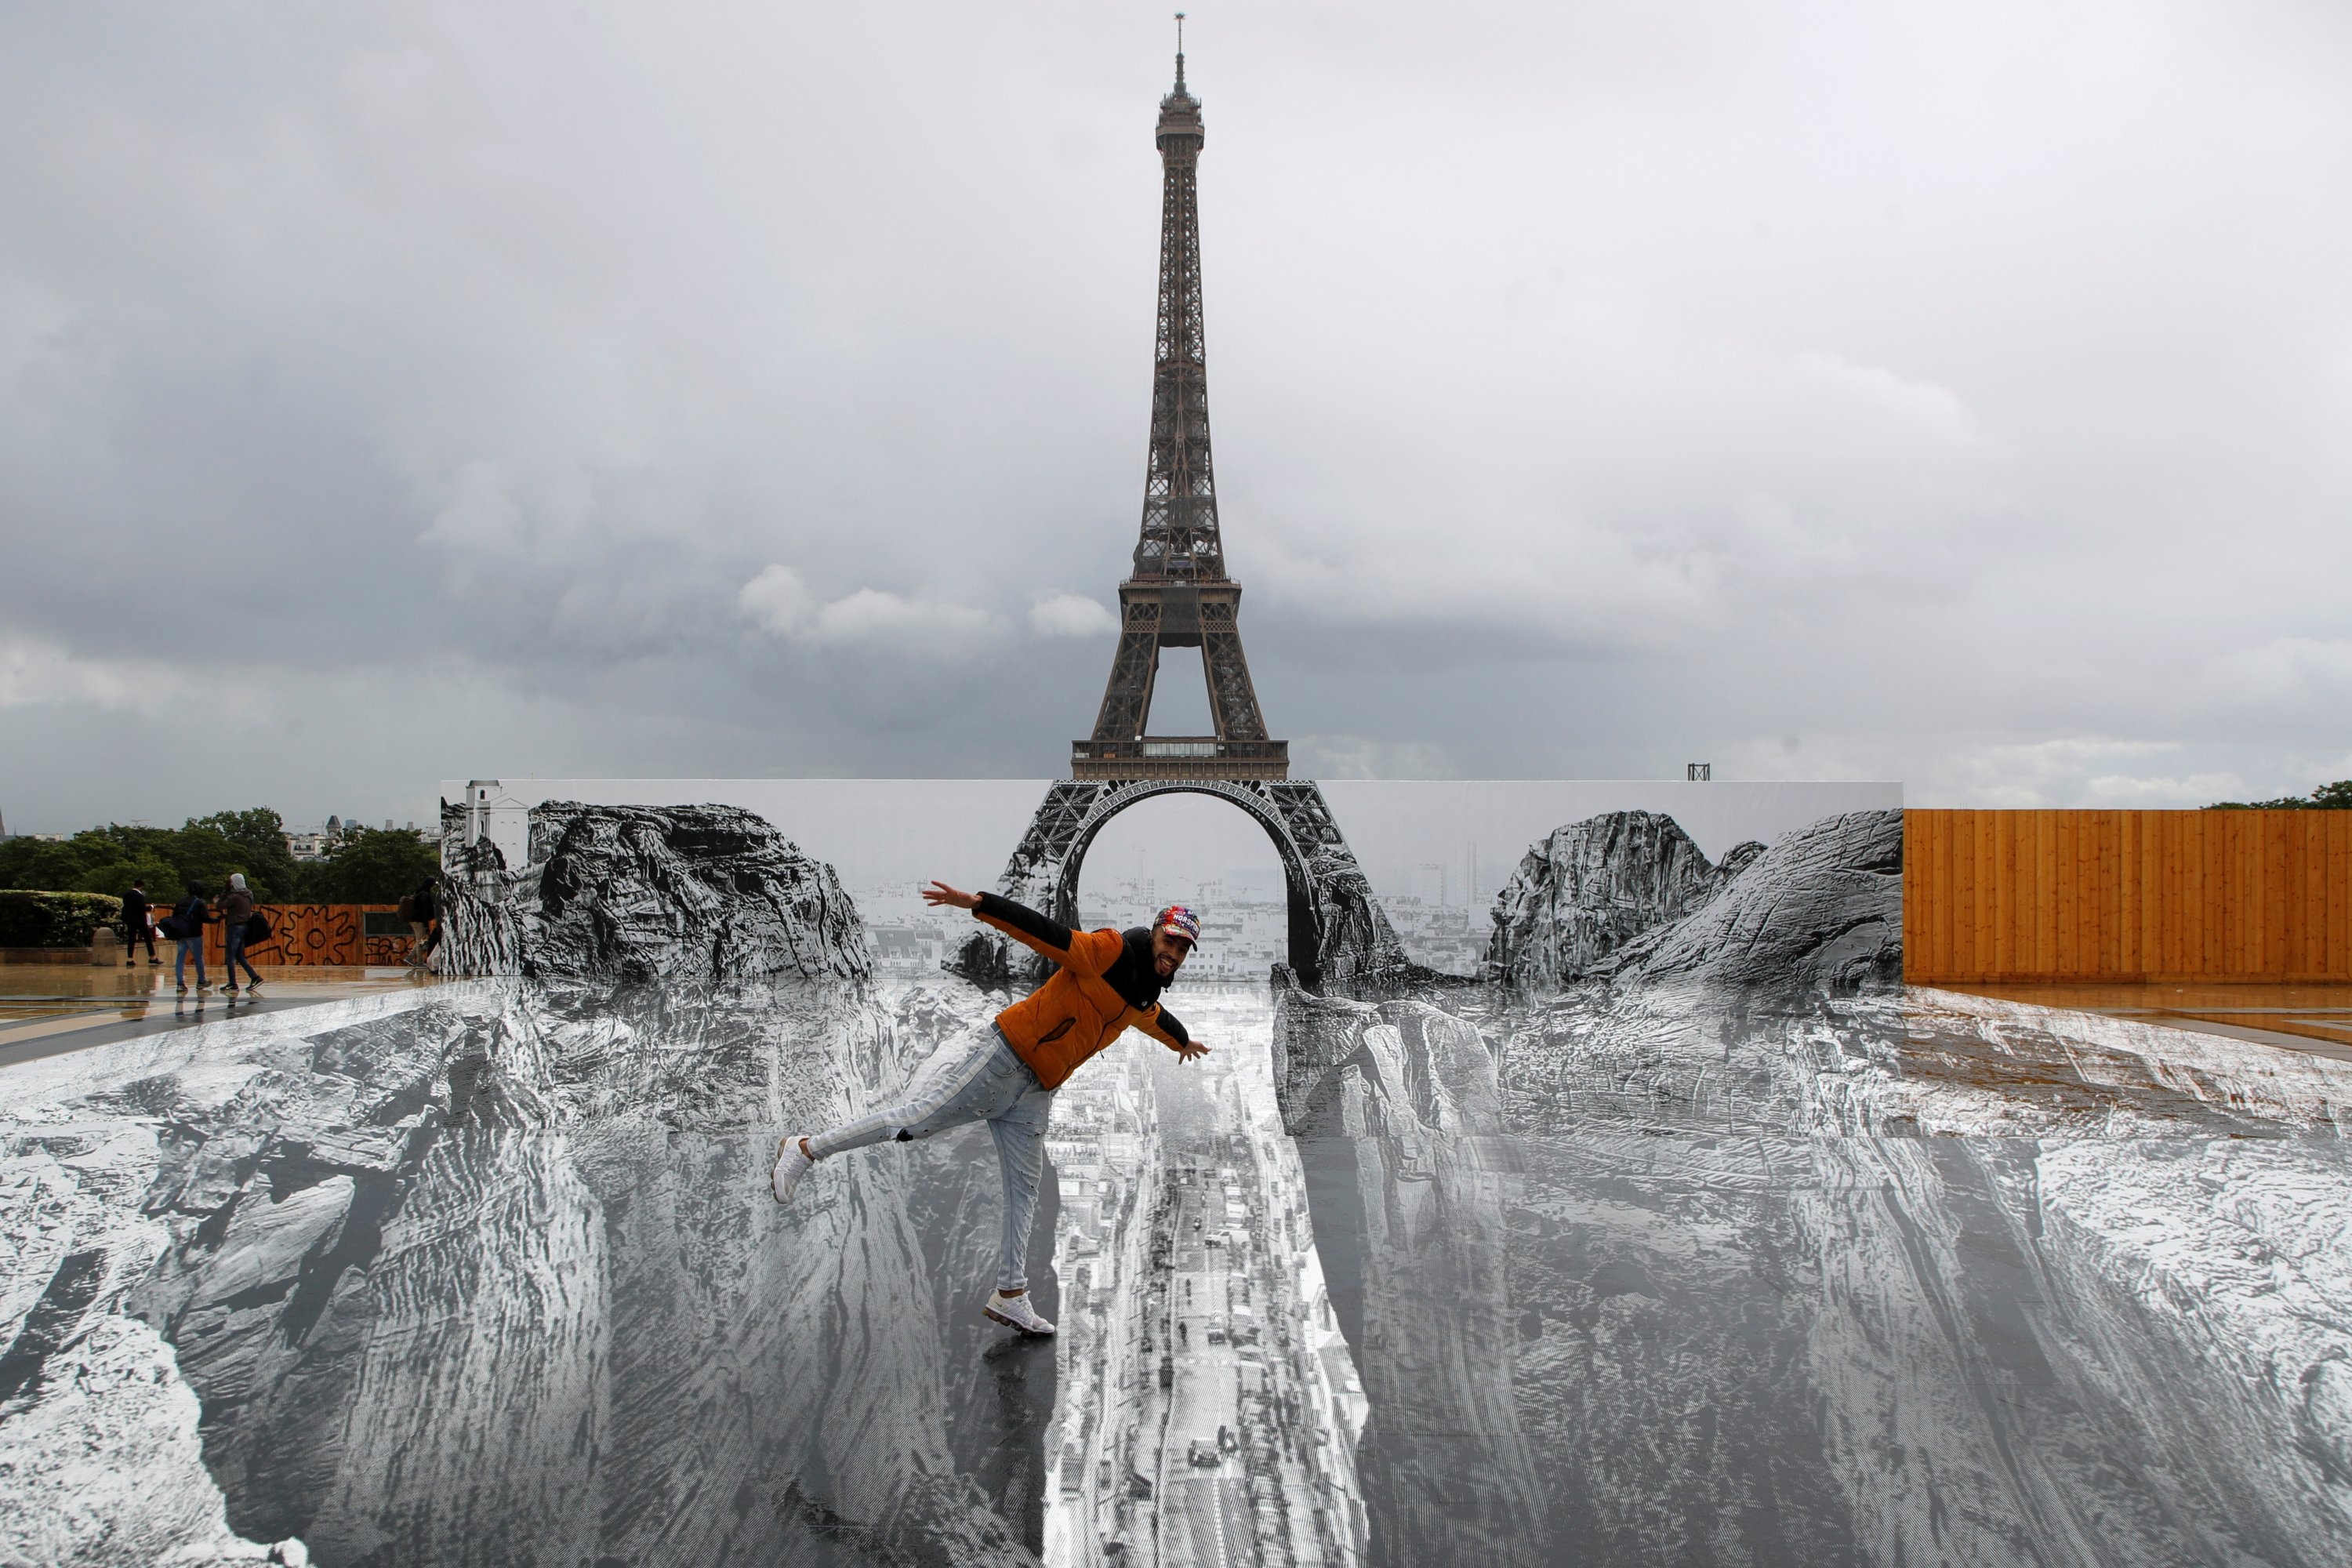 A man poses on giant artwork by French artist JR installed on Trocadero square in front of the Eiffel Tower in Paris, France, May 19, 2021. (Reuters Photo)